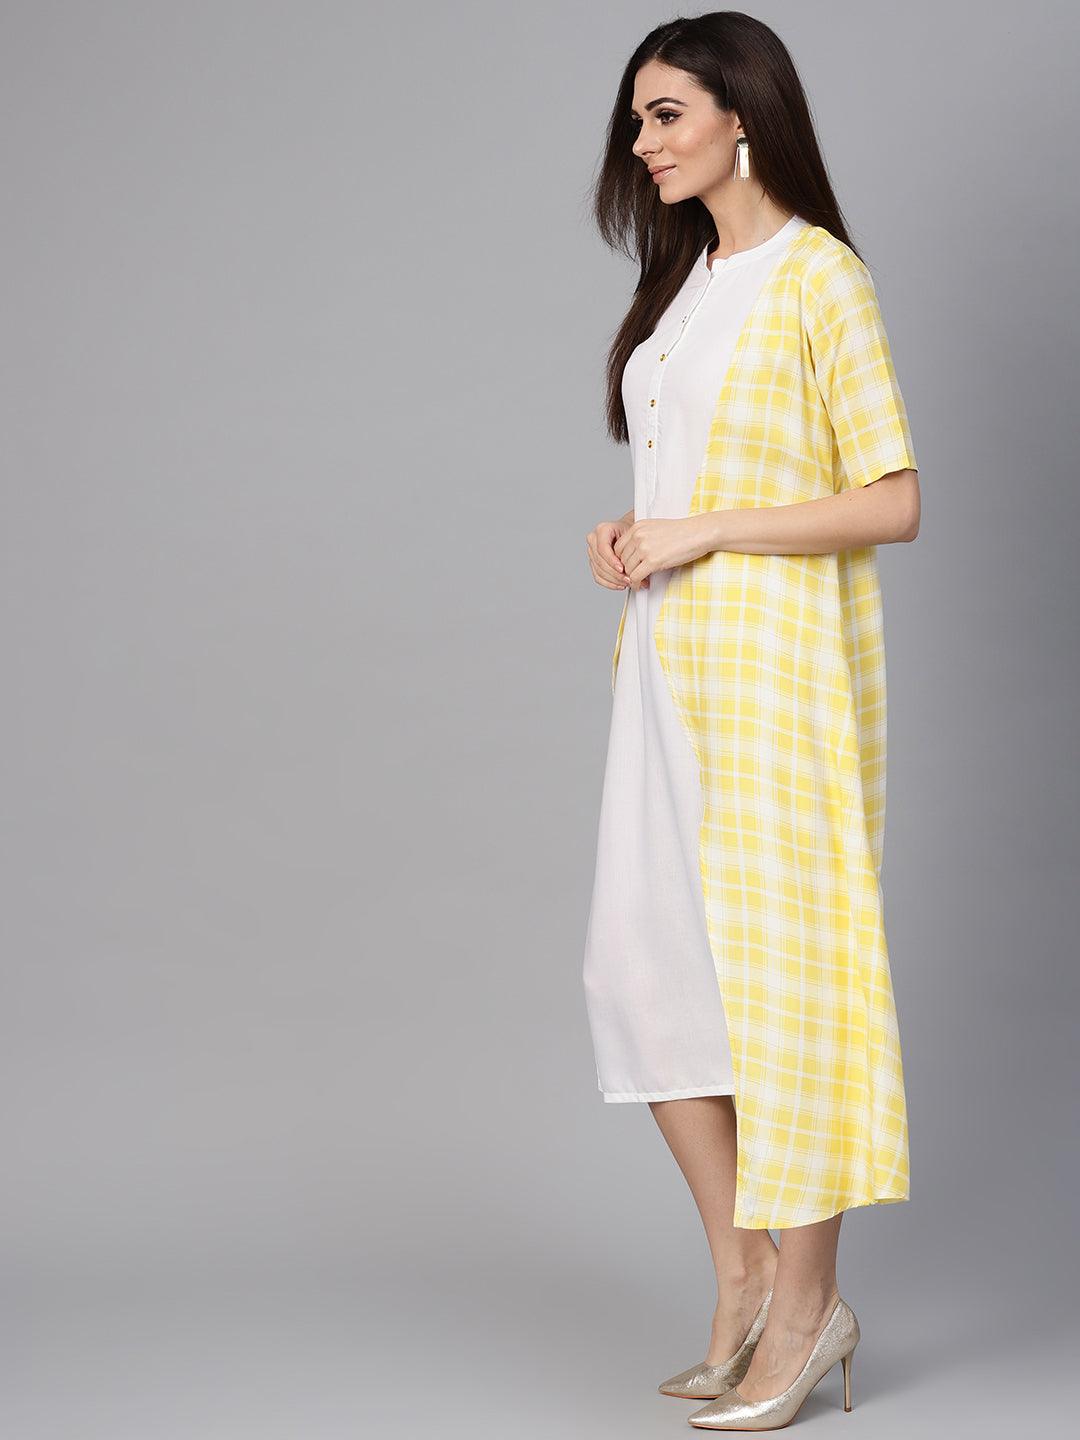 Yellow Checkered Rayon Dress With Jacket